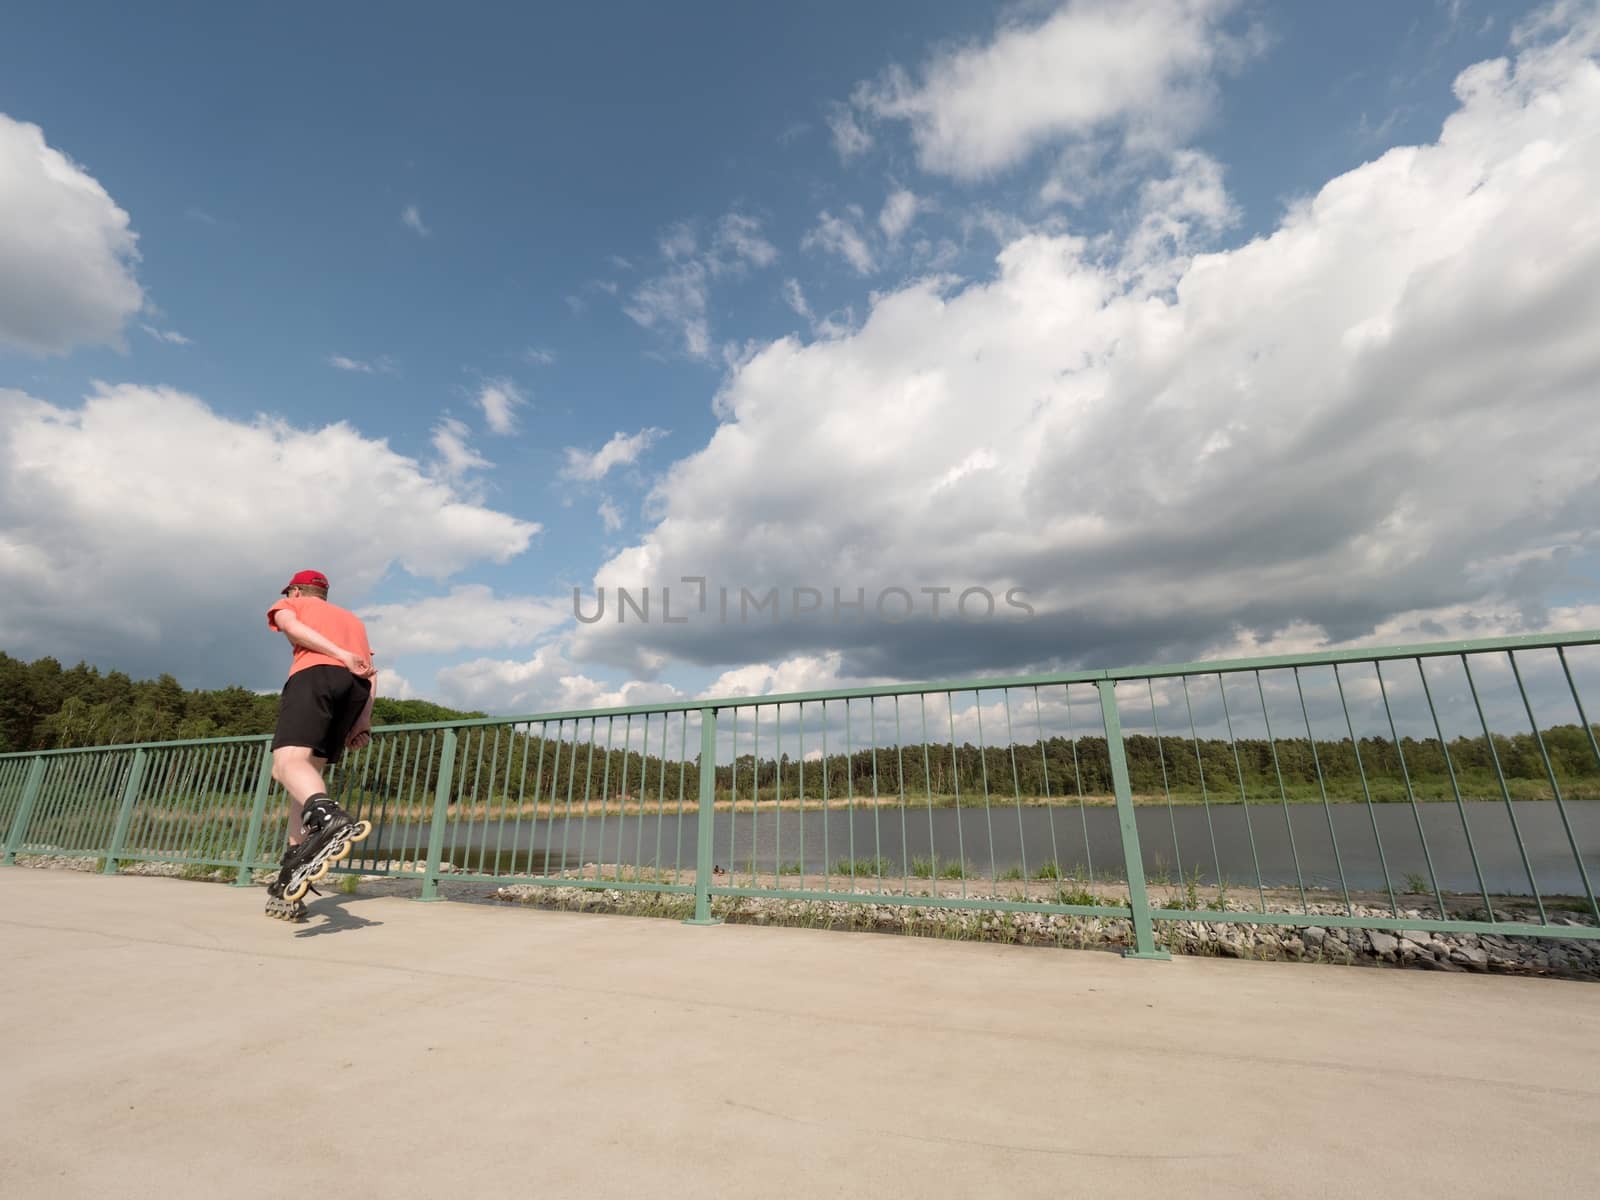 Roller skater in action. Man ride in inline skates ride along promenade handrail, blue sky in background. Low angle view